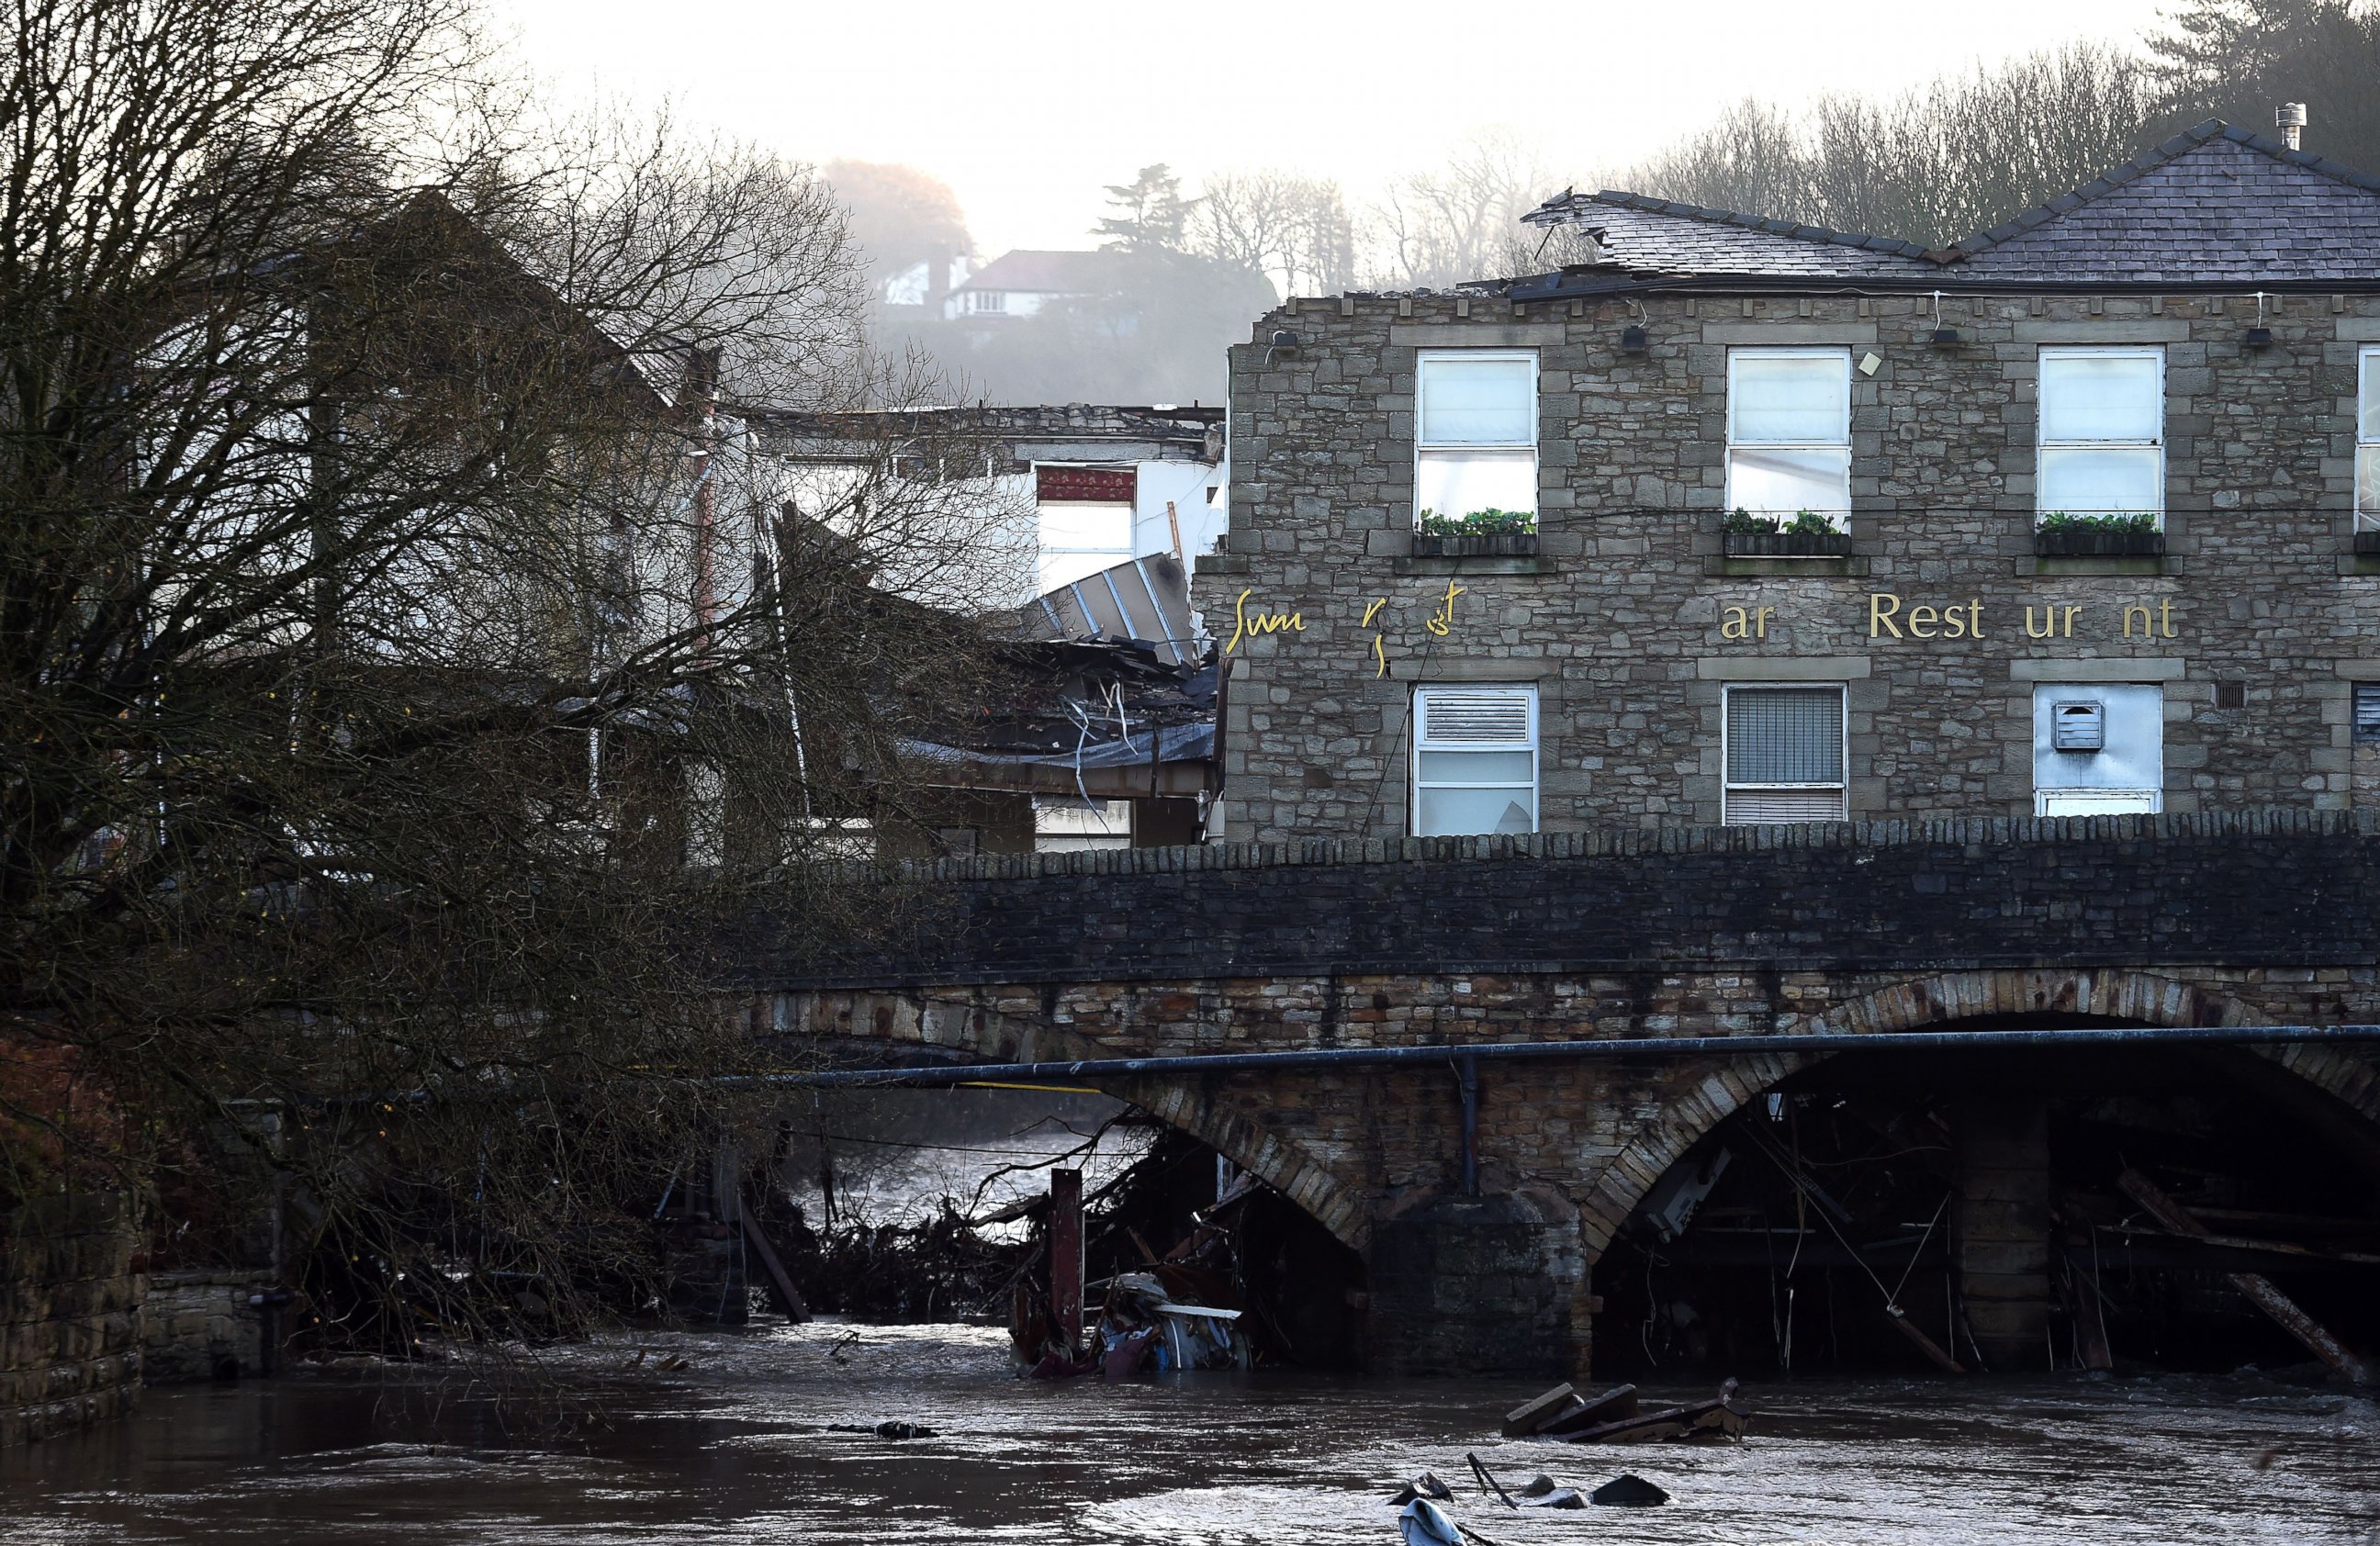 PHOTO:Damage to The Waterside Pub, a two hundred year old public house, Dec. 27, 2015, the day after the River Irwell, swelled by exceptionally heavy rainfall swept through the village of Summerseat in Greater Manchester causing widespread damage.  